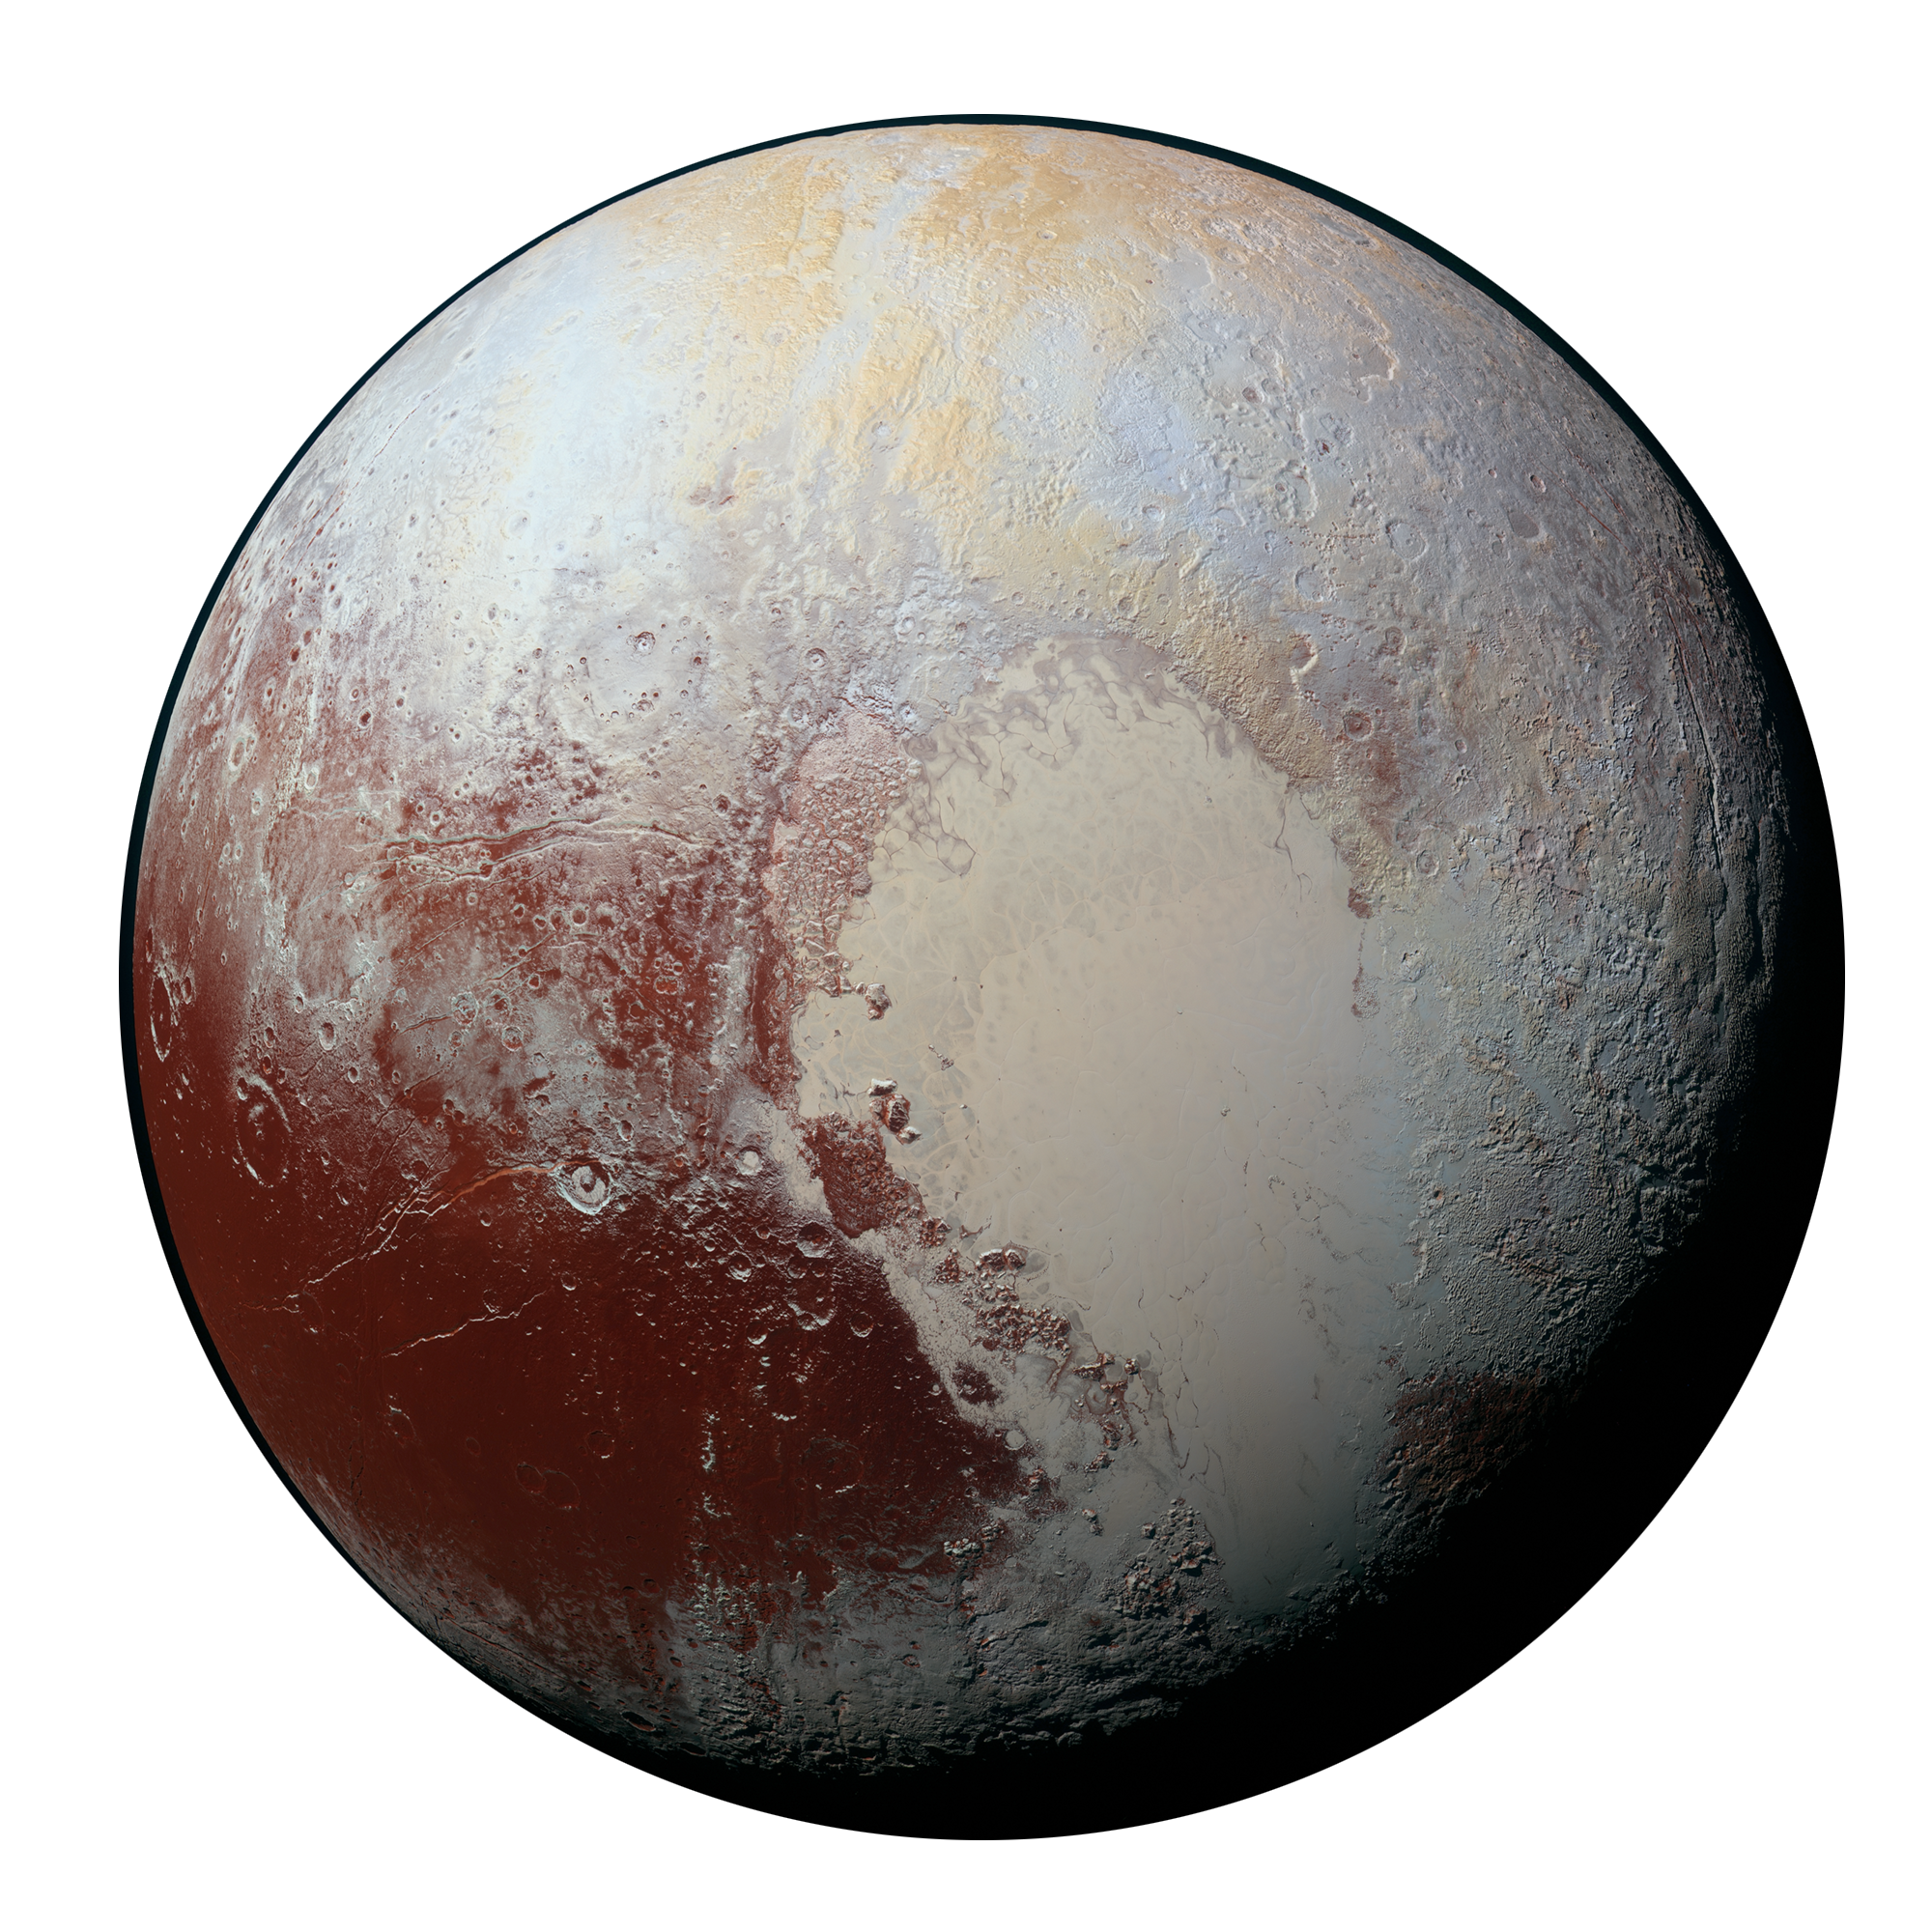 “The Rich Color Variations of Pluto” - NASA/JHUAPL/SwRI (image cropped)